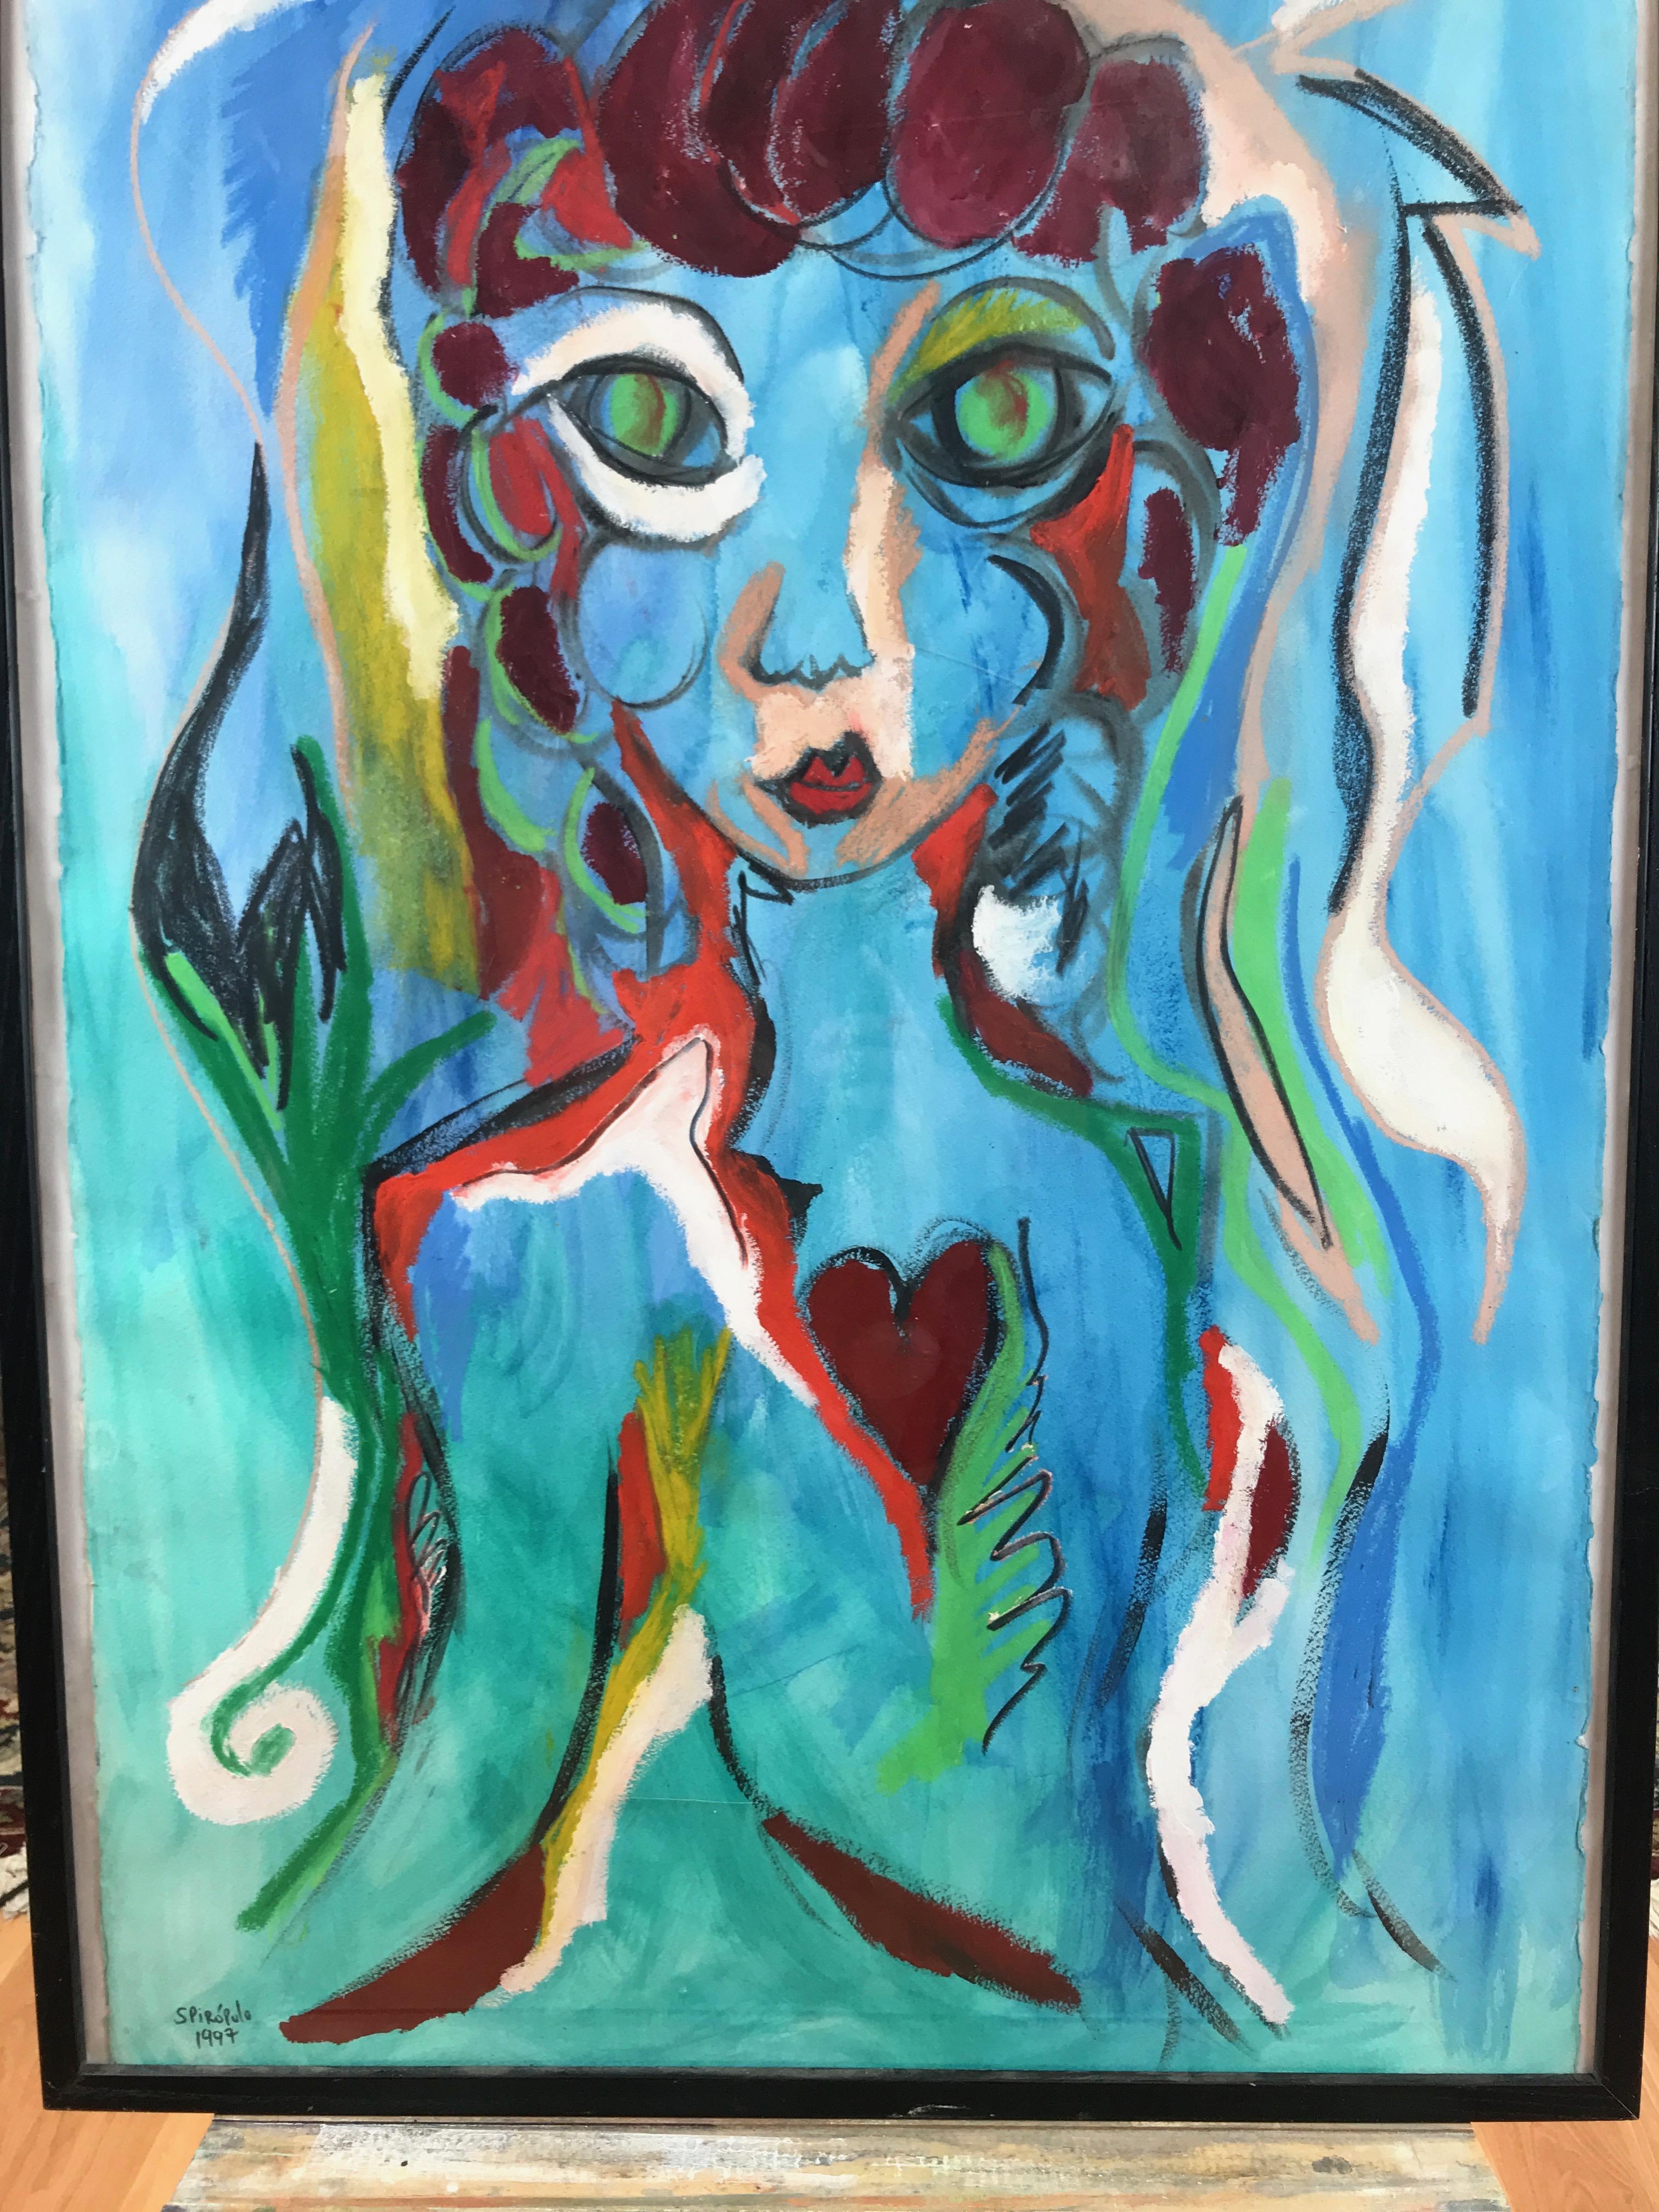 Jorge Spiropulo “Figure with Heart” Expressionist Mixed Media Painting, 1997 1